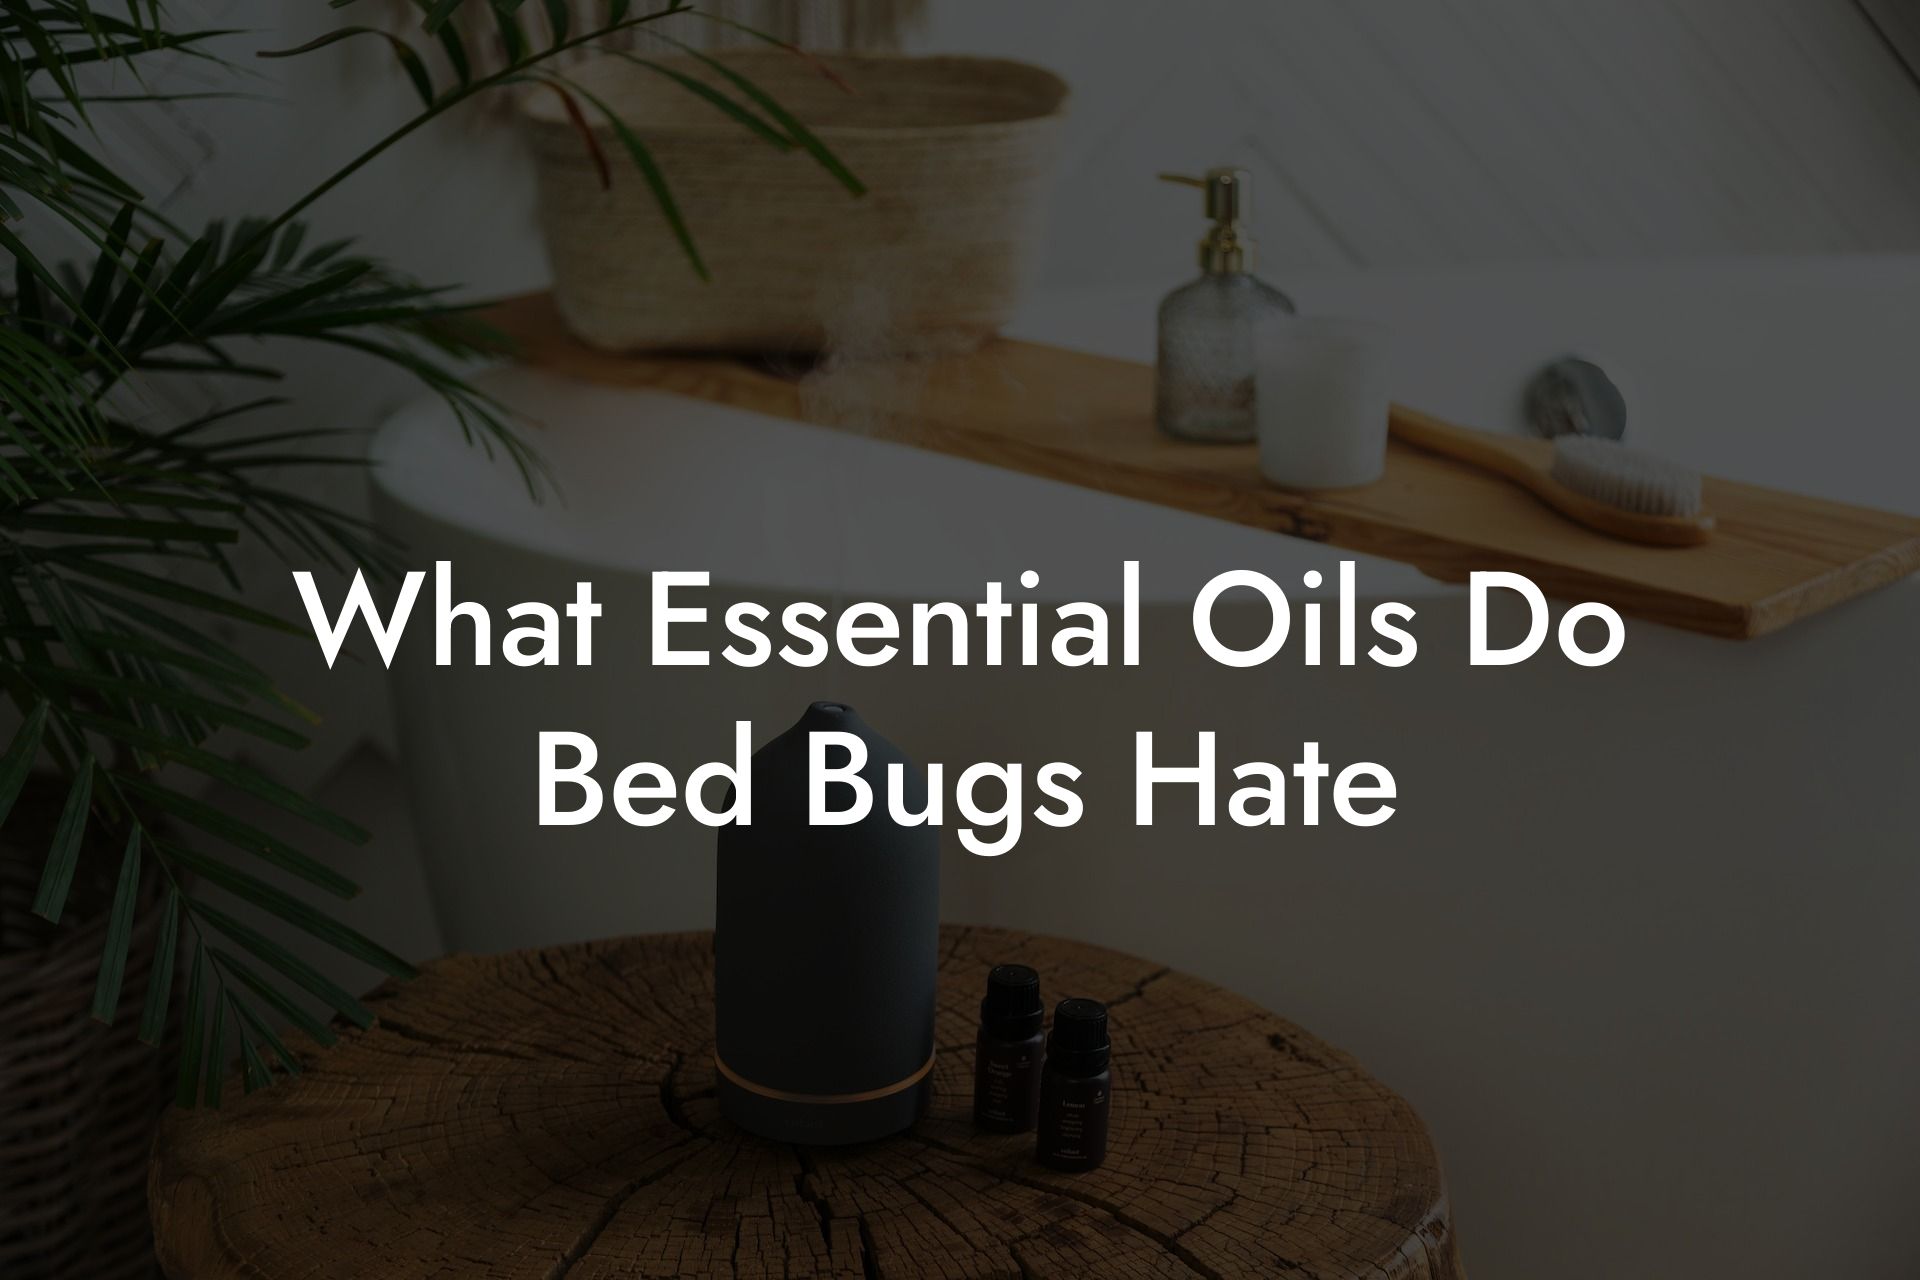 What Essential Oils Do Bed Bugs Hate